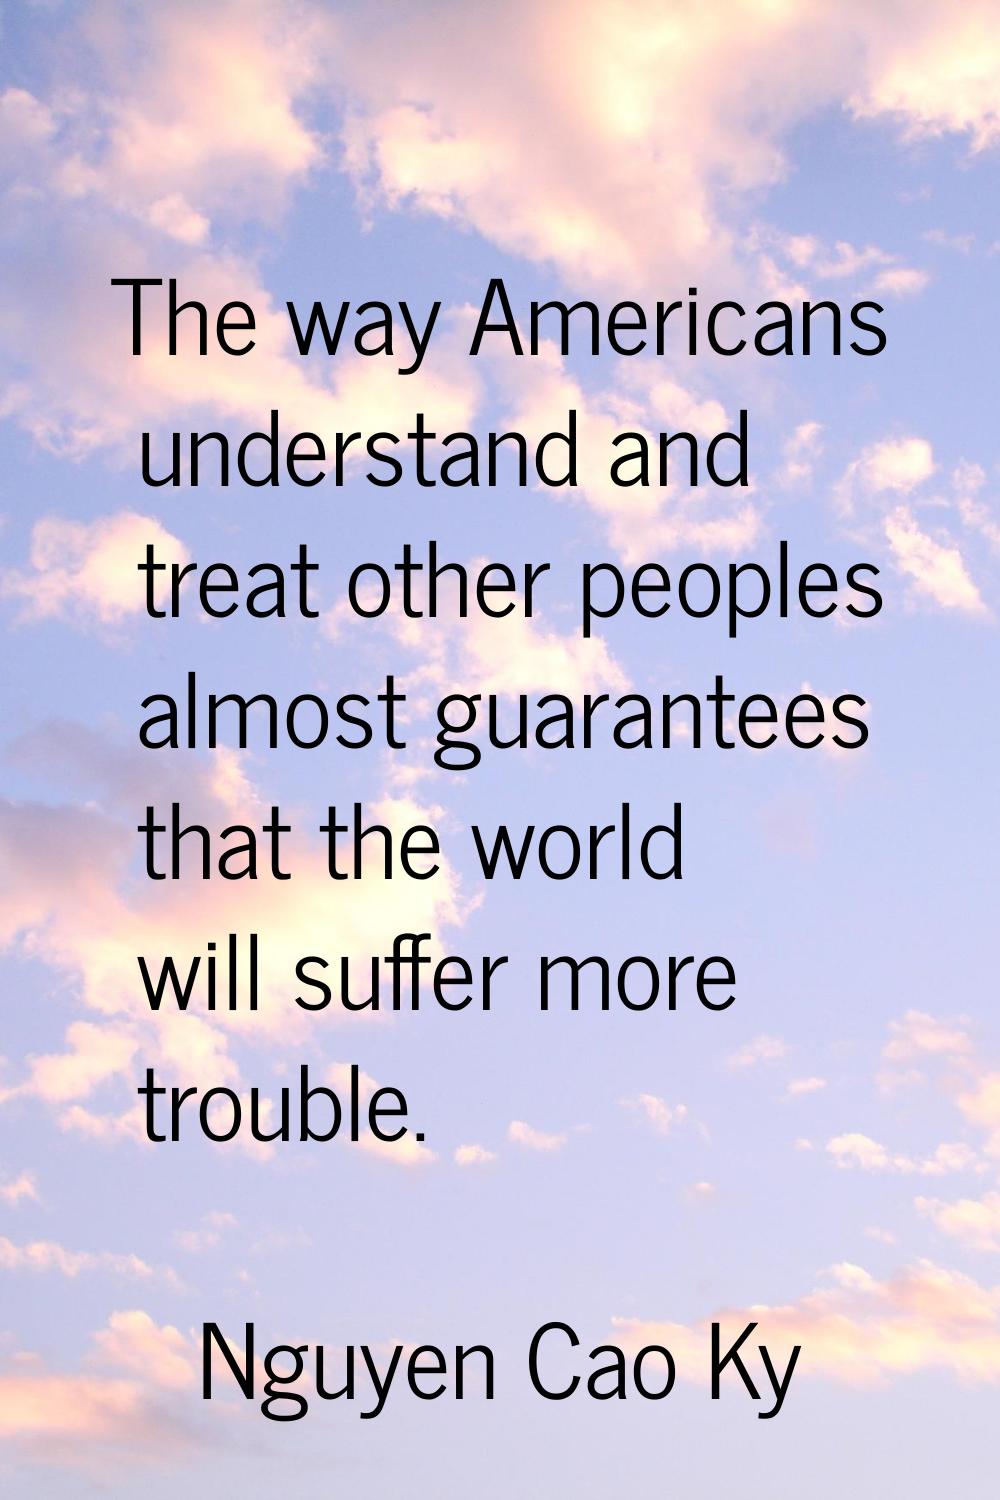 The way Americans understand and treat other peoples almost guarantees that the world will suffer m